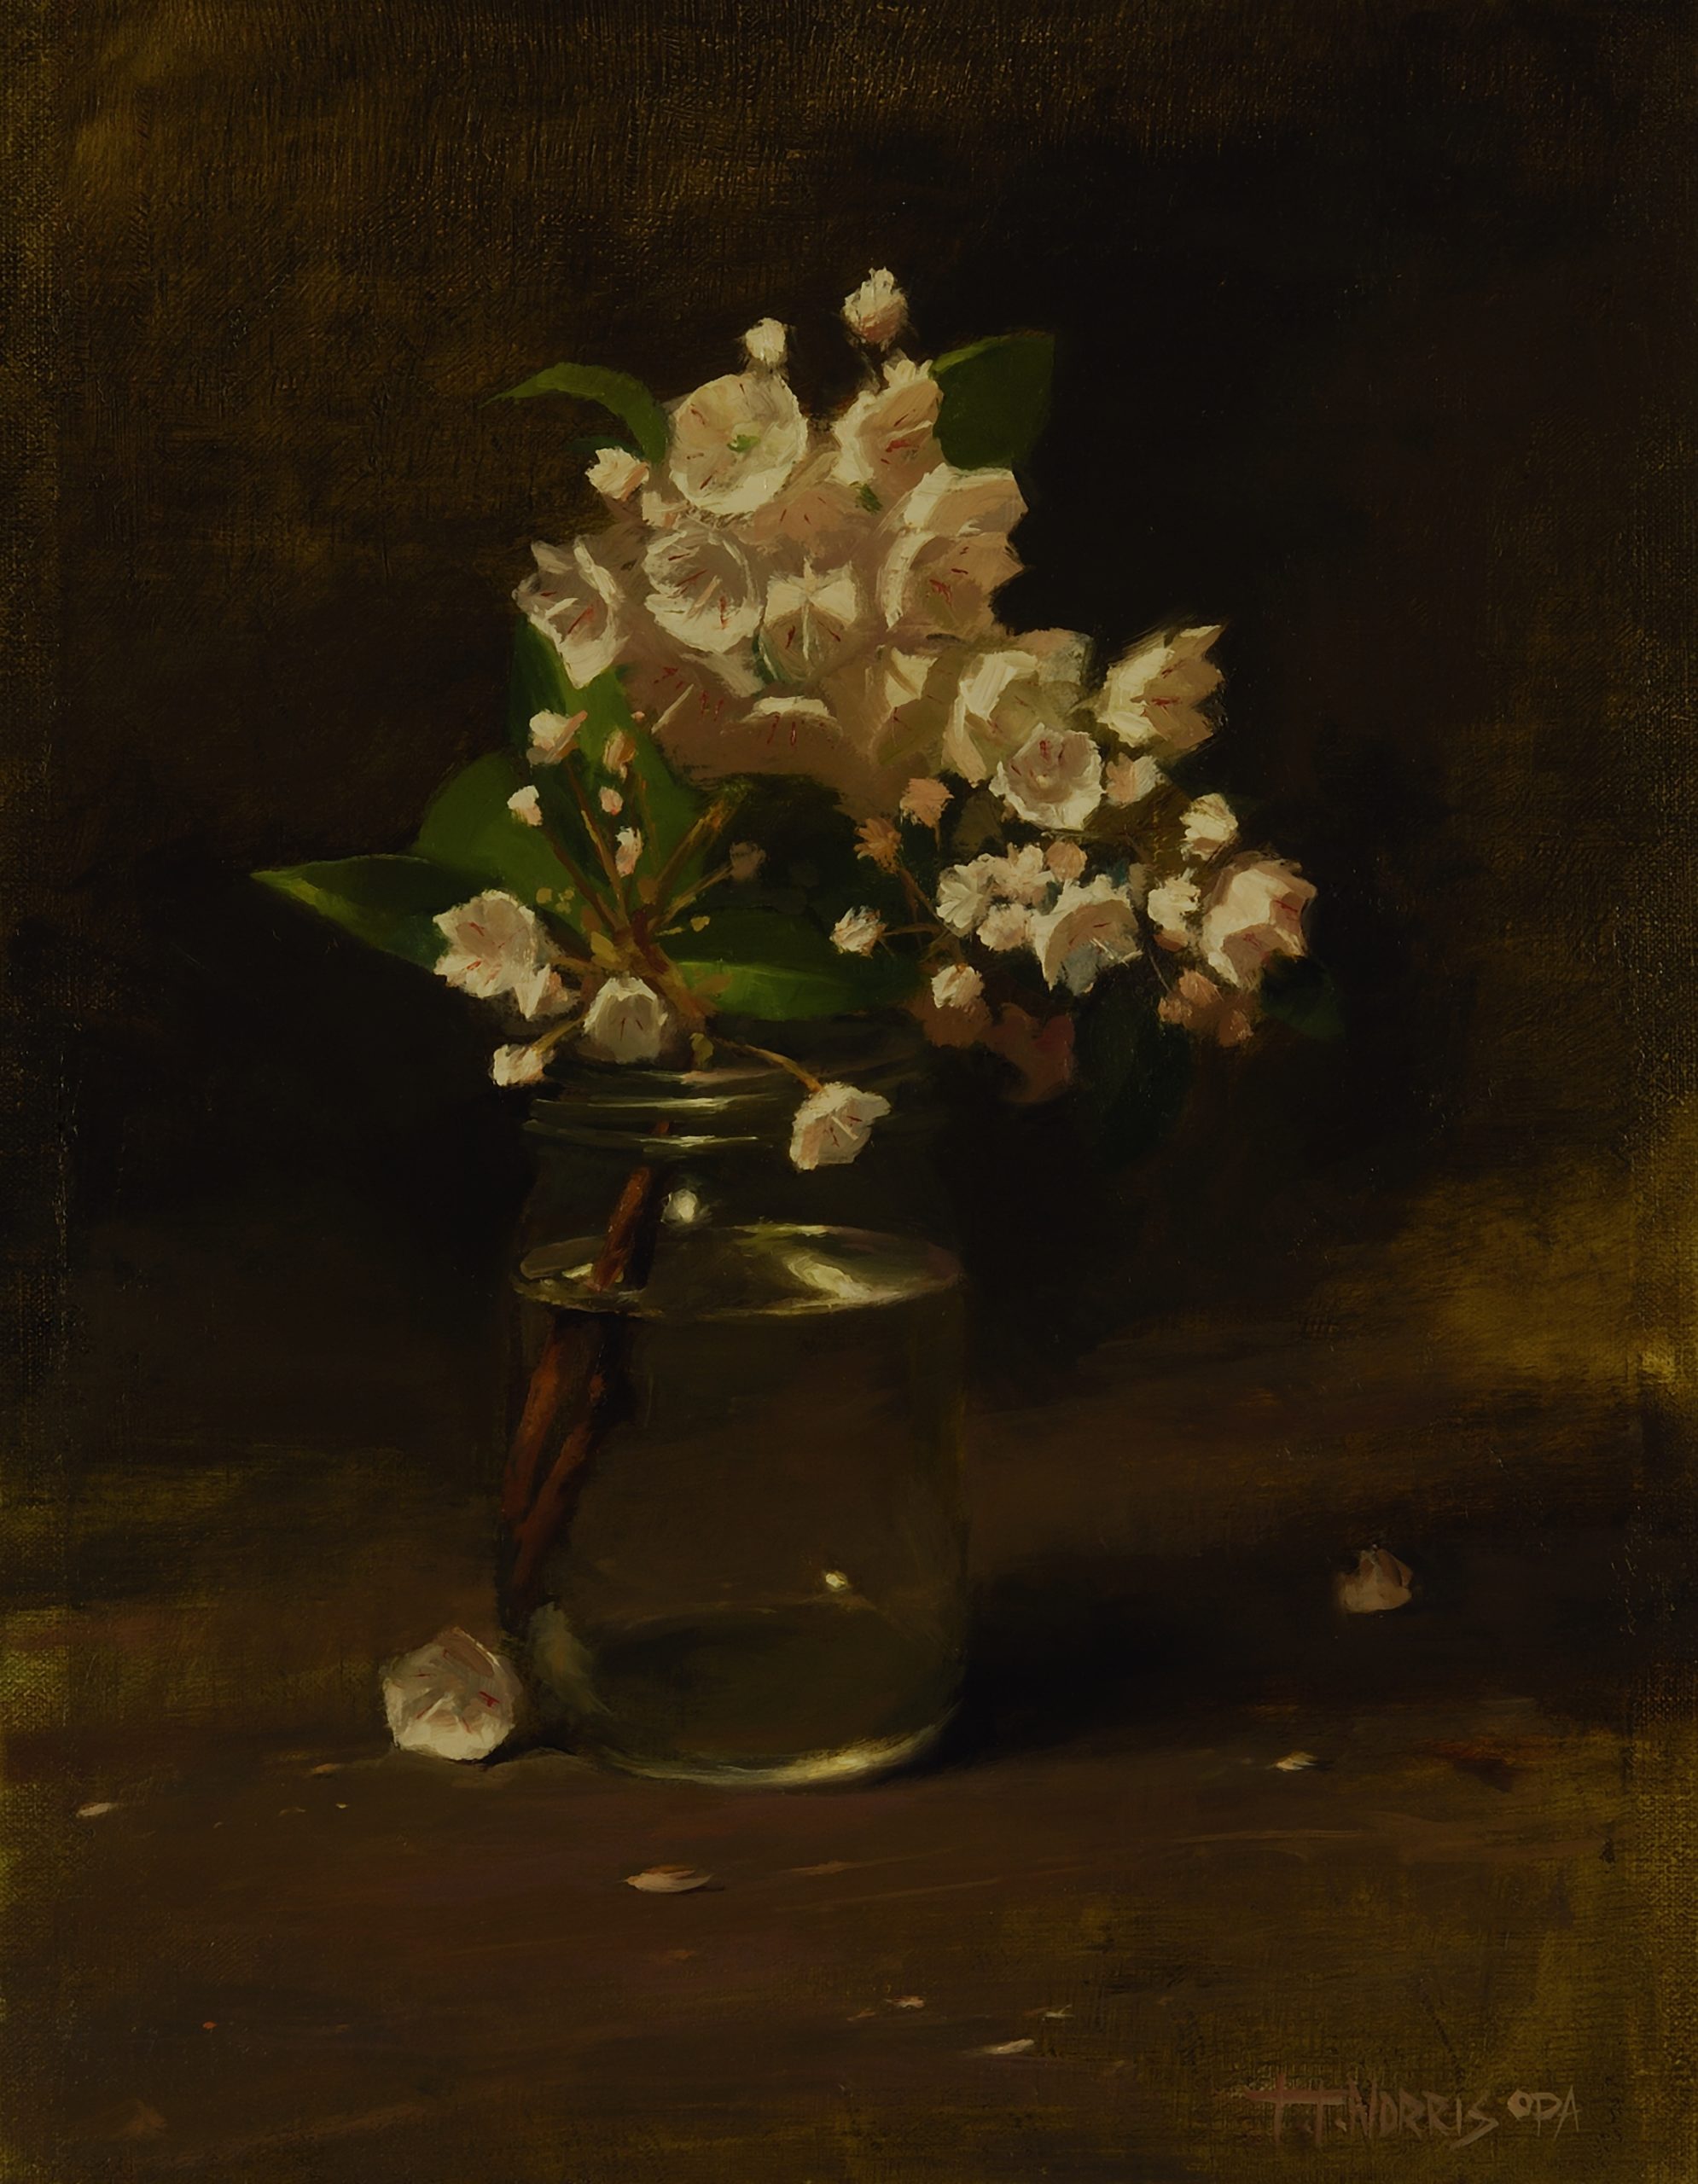 Realistic still life painting